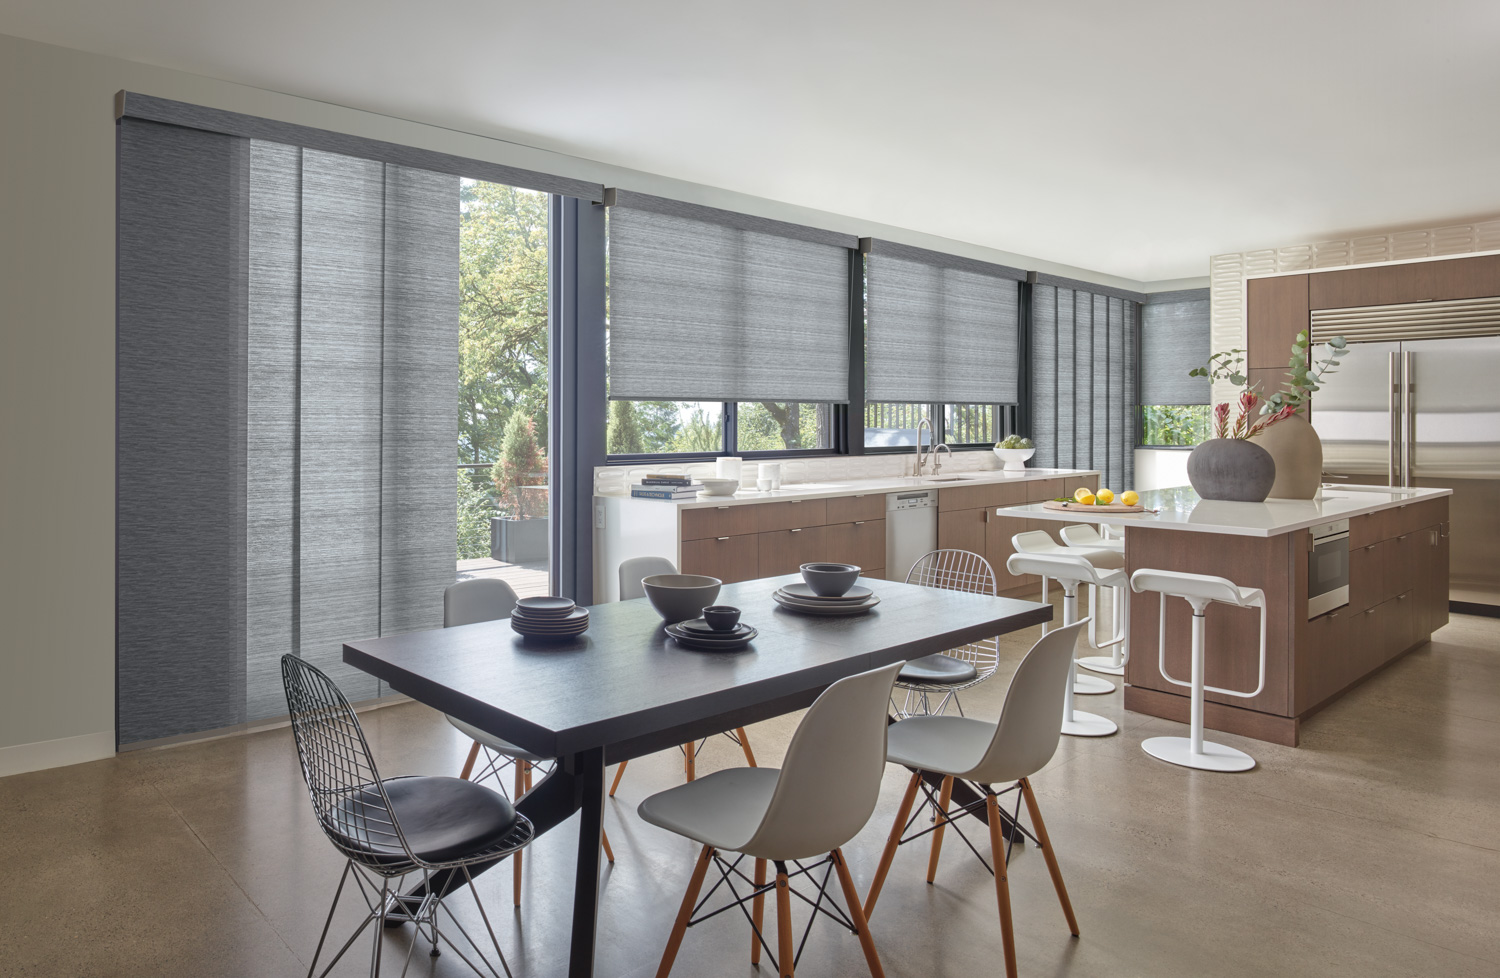 Dining area in kitchen with Hunter Douglas Designer Roller Shades.